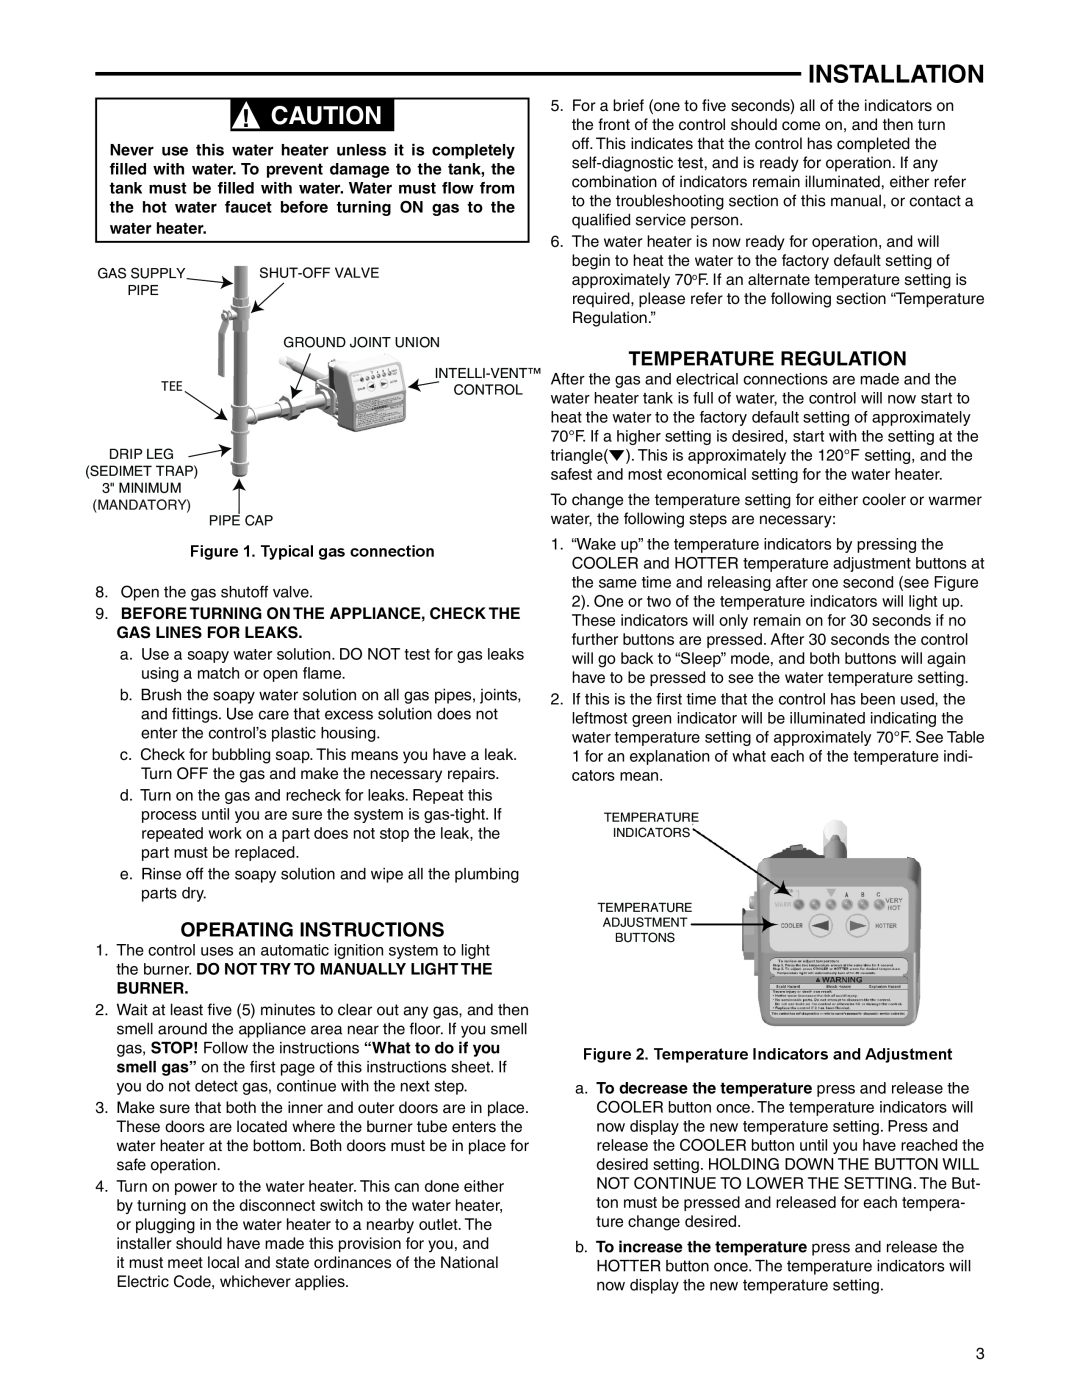 White Rodgers 37E37A-903 & 906 Operating Instructions, Temperature Regulation, Installation, Typical gas connection 